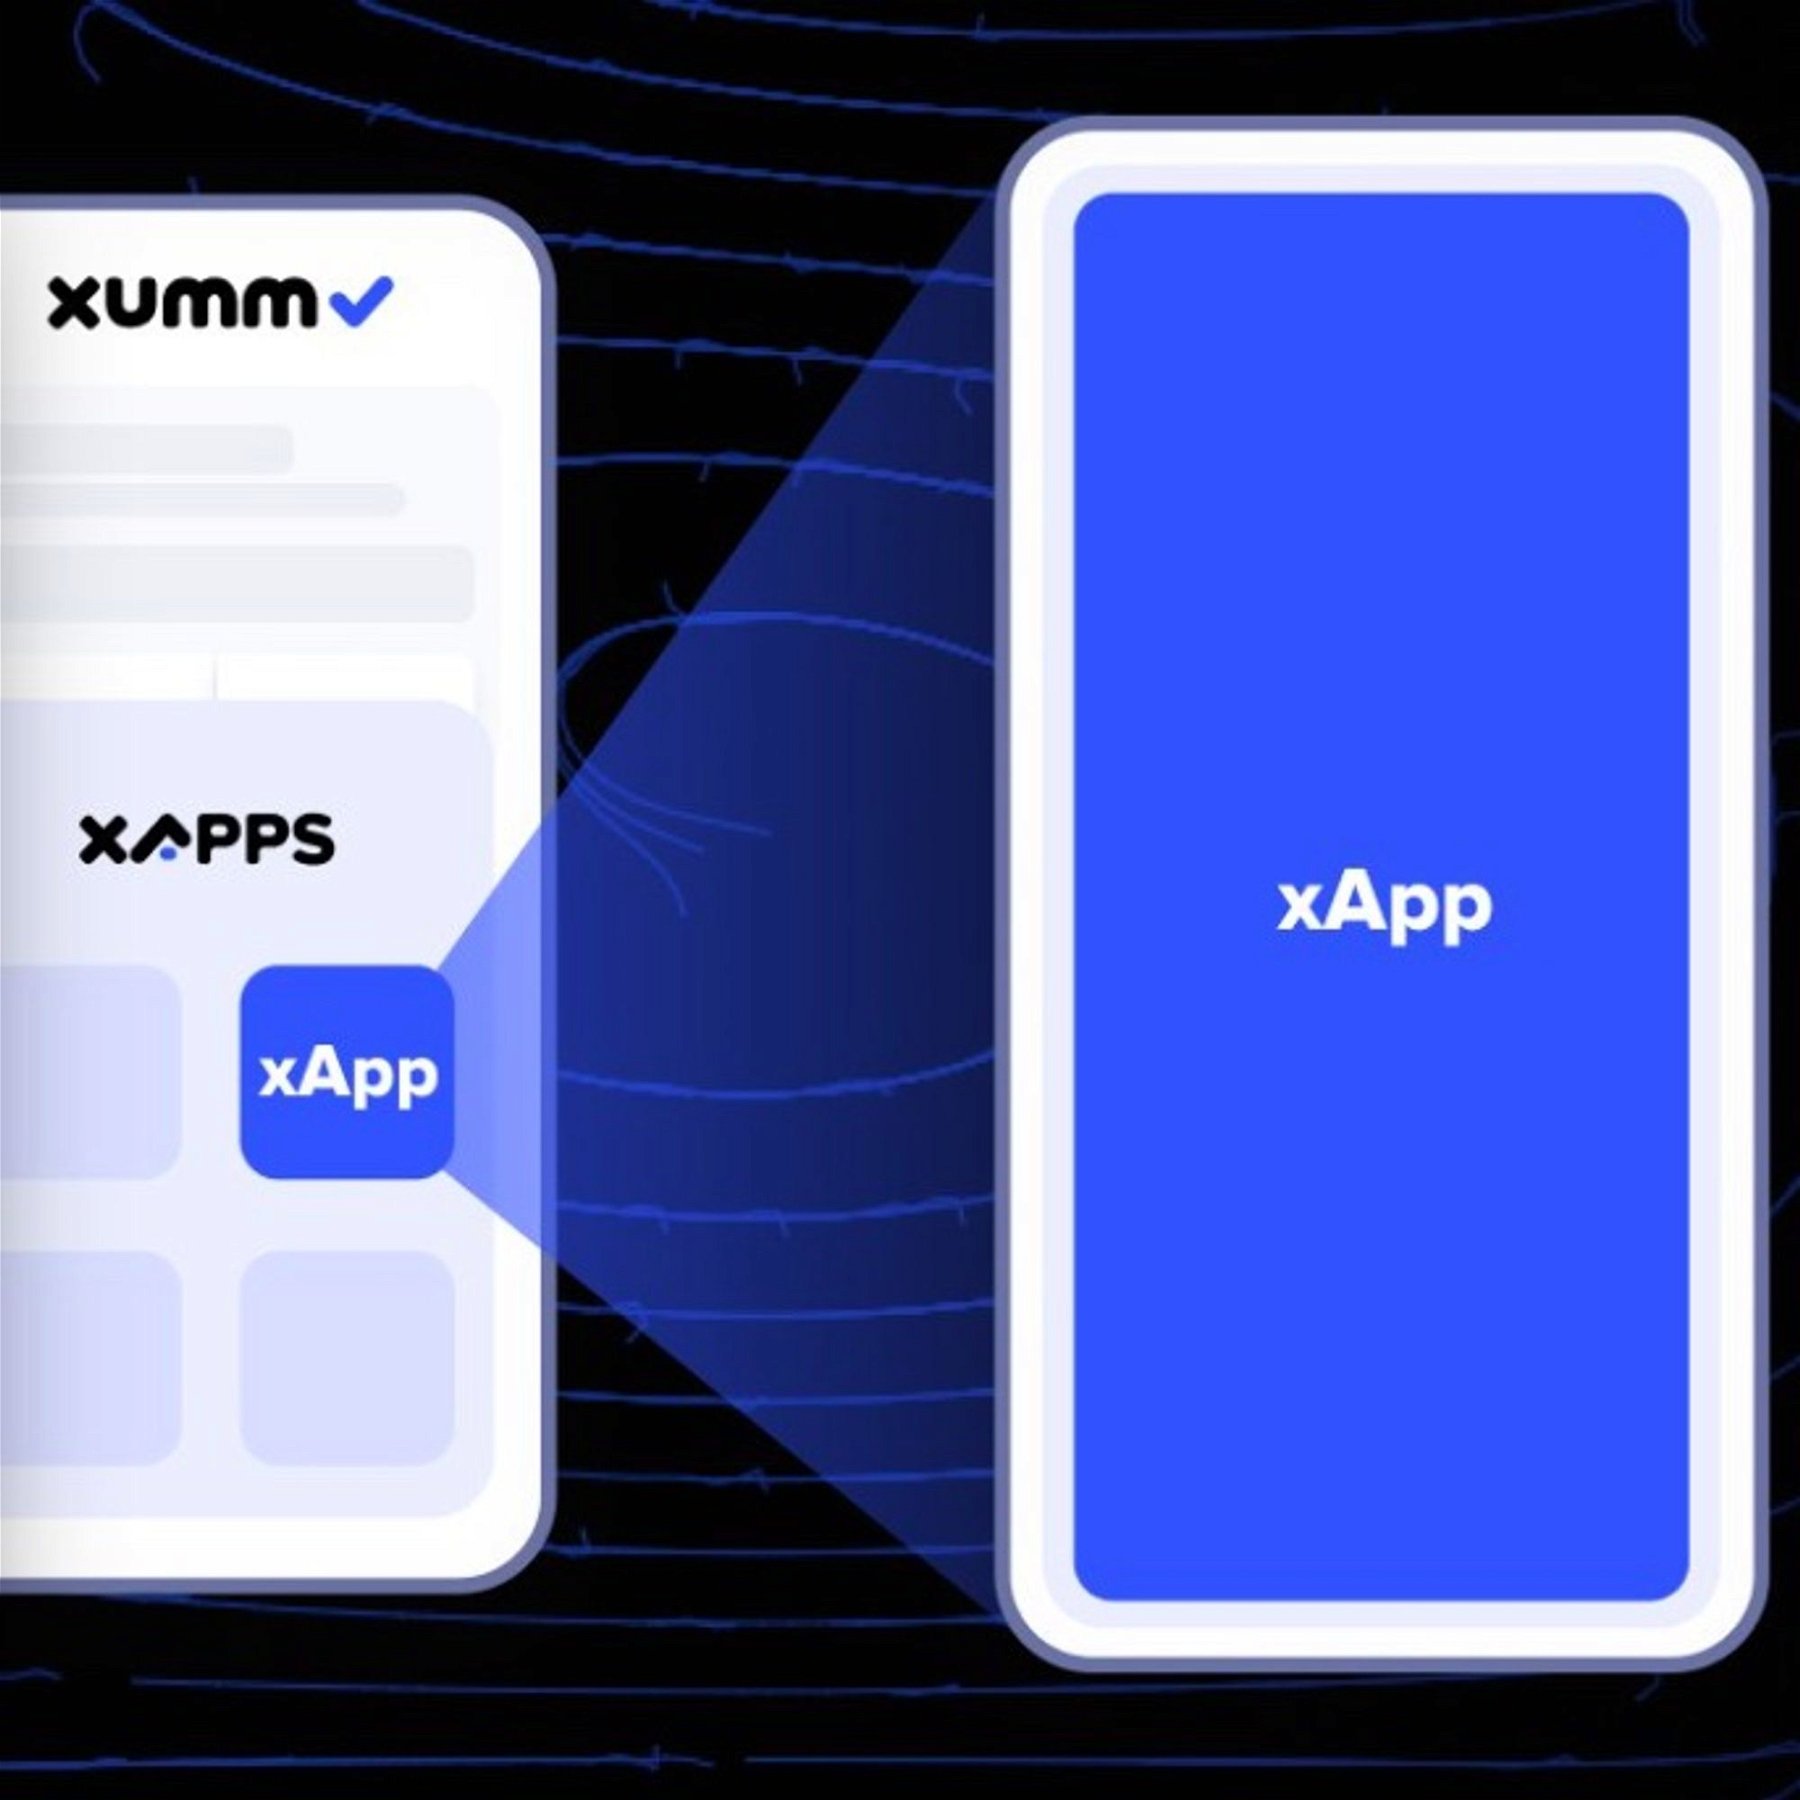 Xumm xApp developers are in for a special treat.